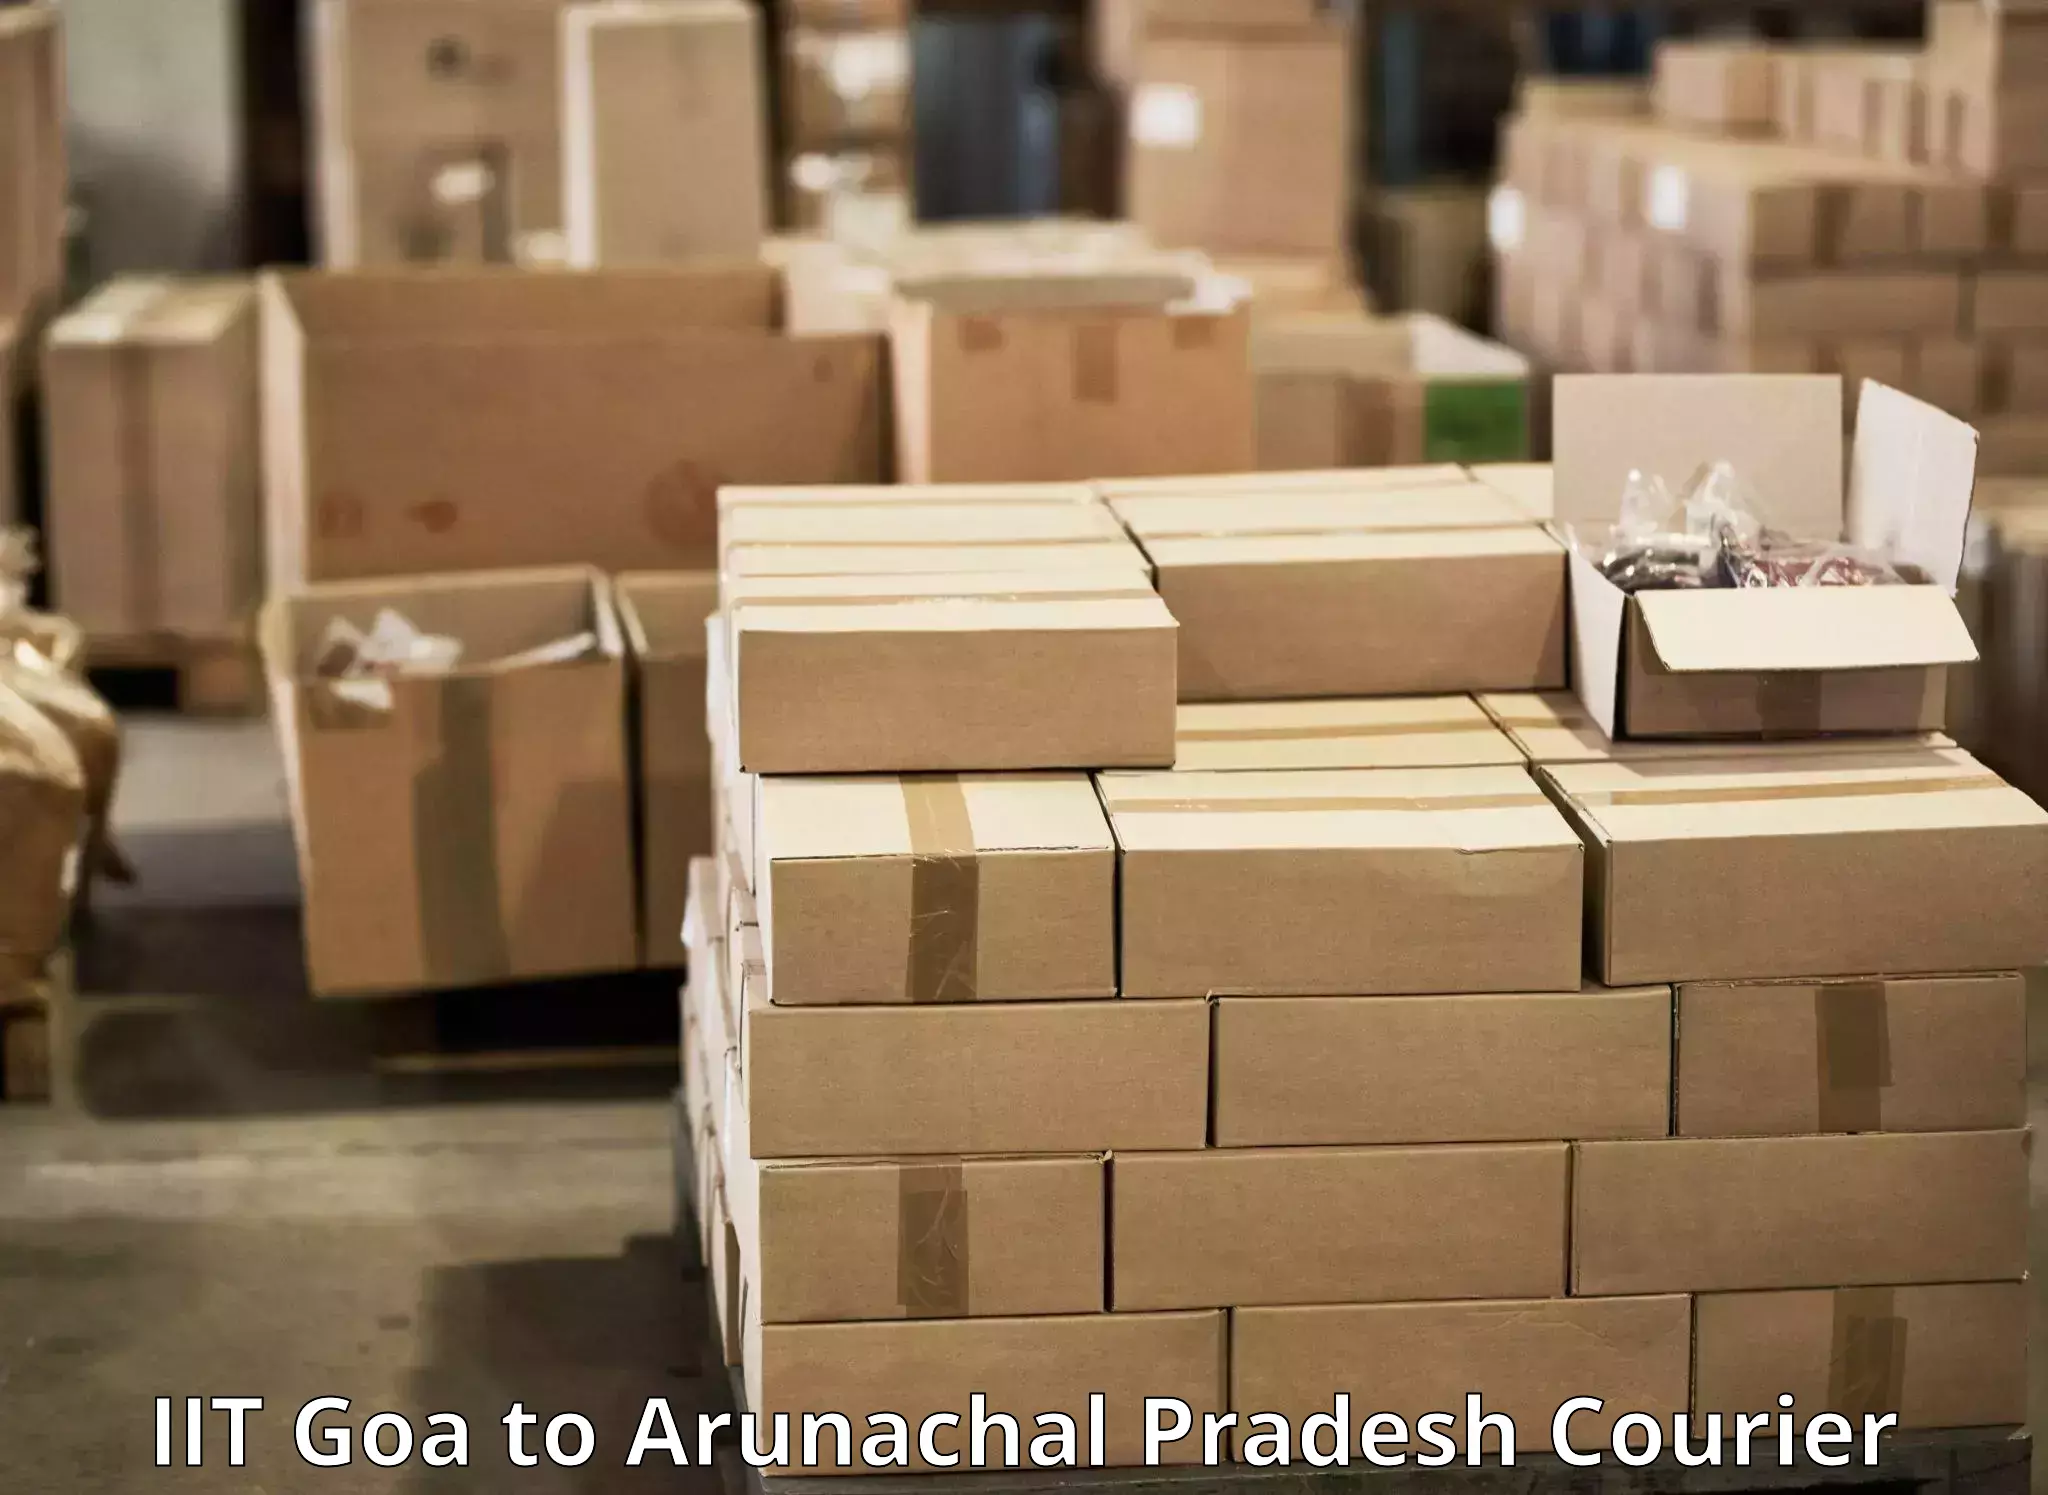 Fast shipping solutions in IIT Goa to Lower Dibang Valley